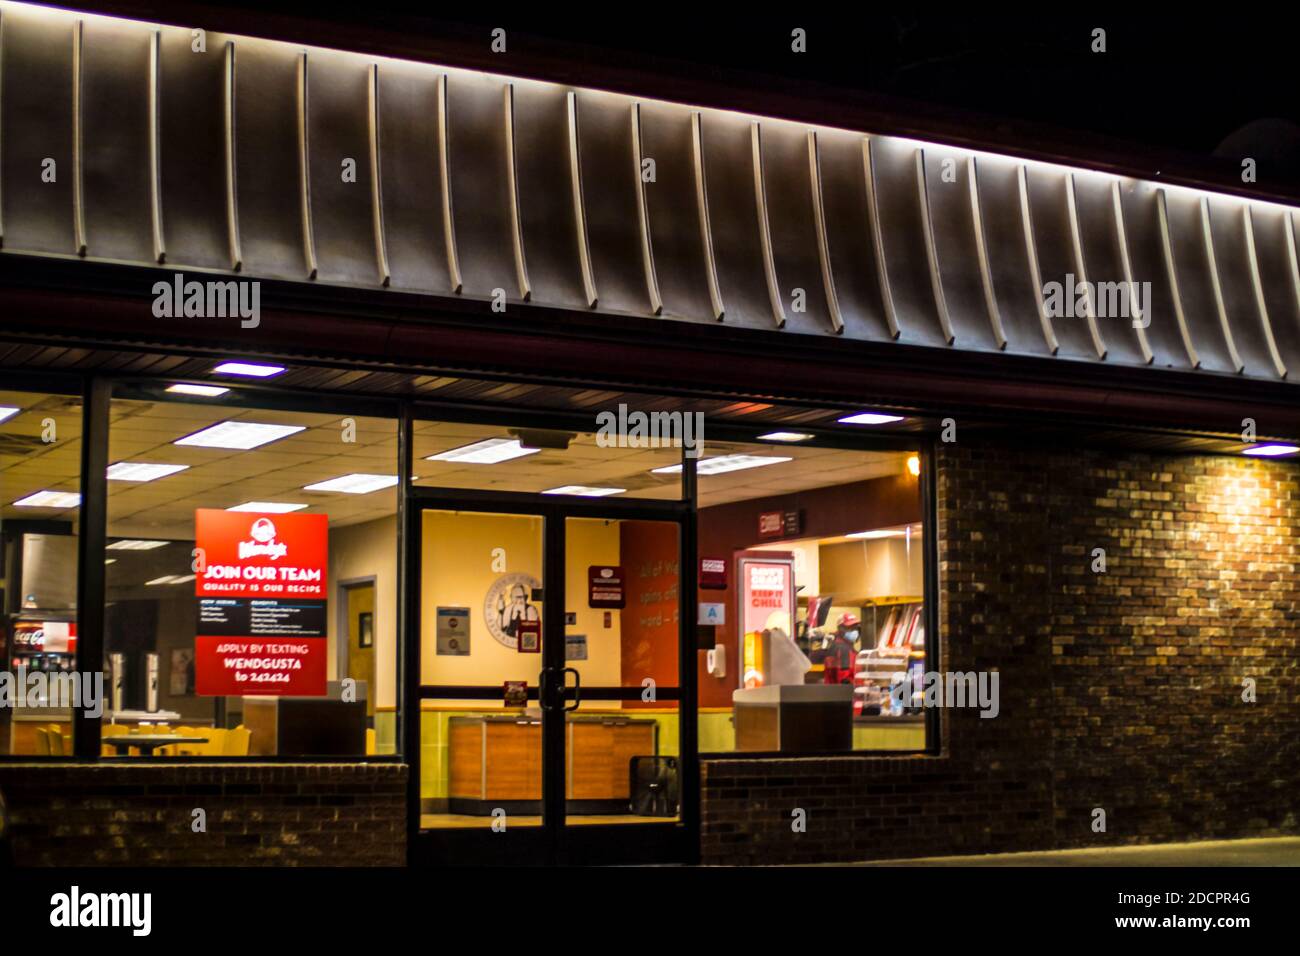 Augusta, Ga / USA - 11 20 20: Wendys Restaurant worker wears face mask inside outside view at night Stock Photo